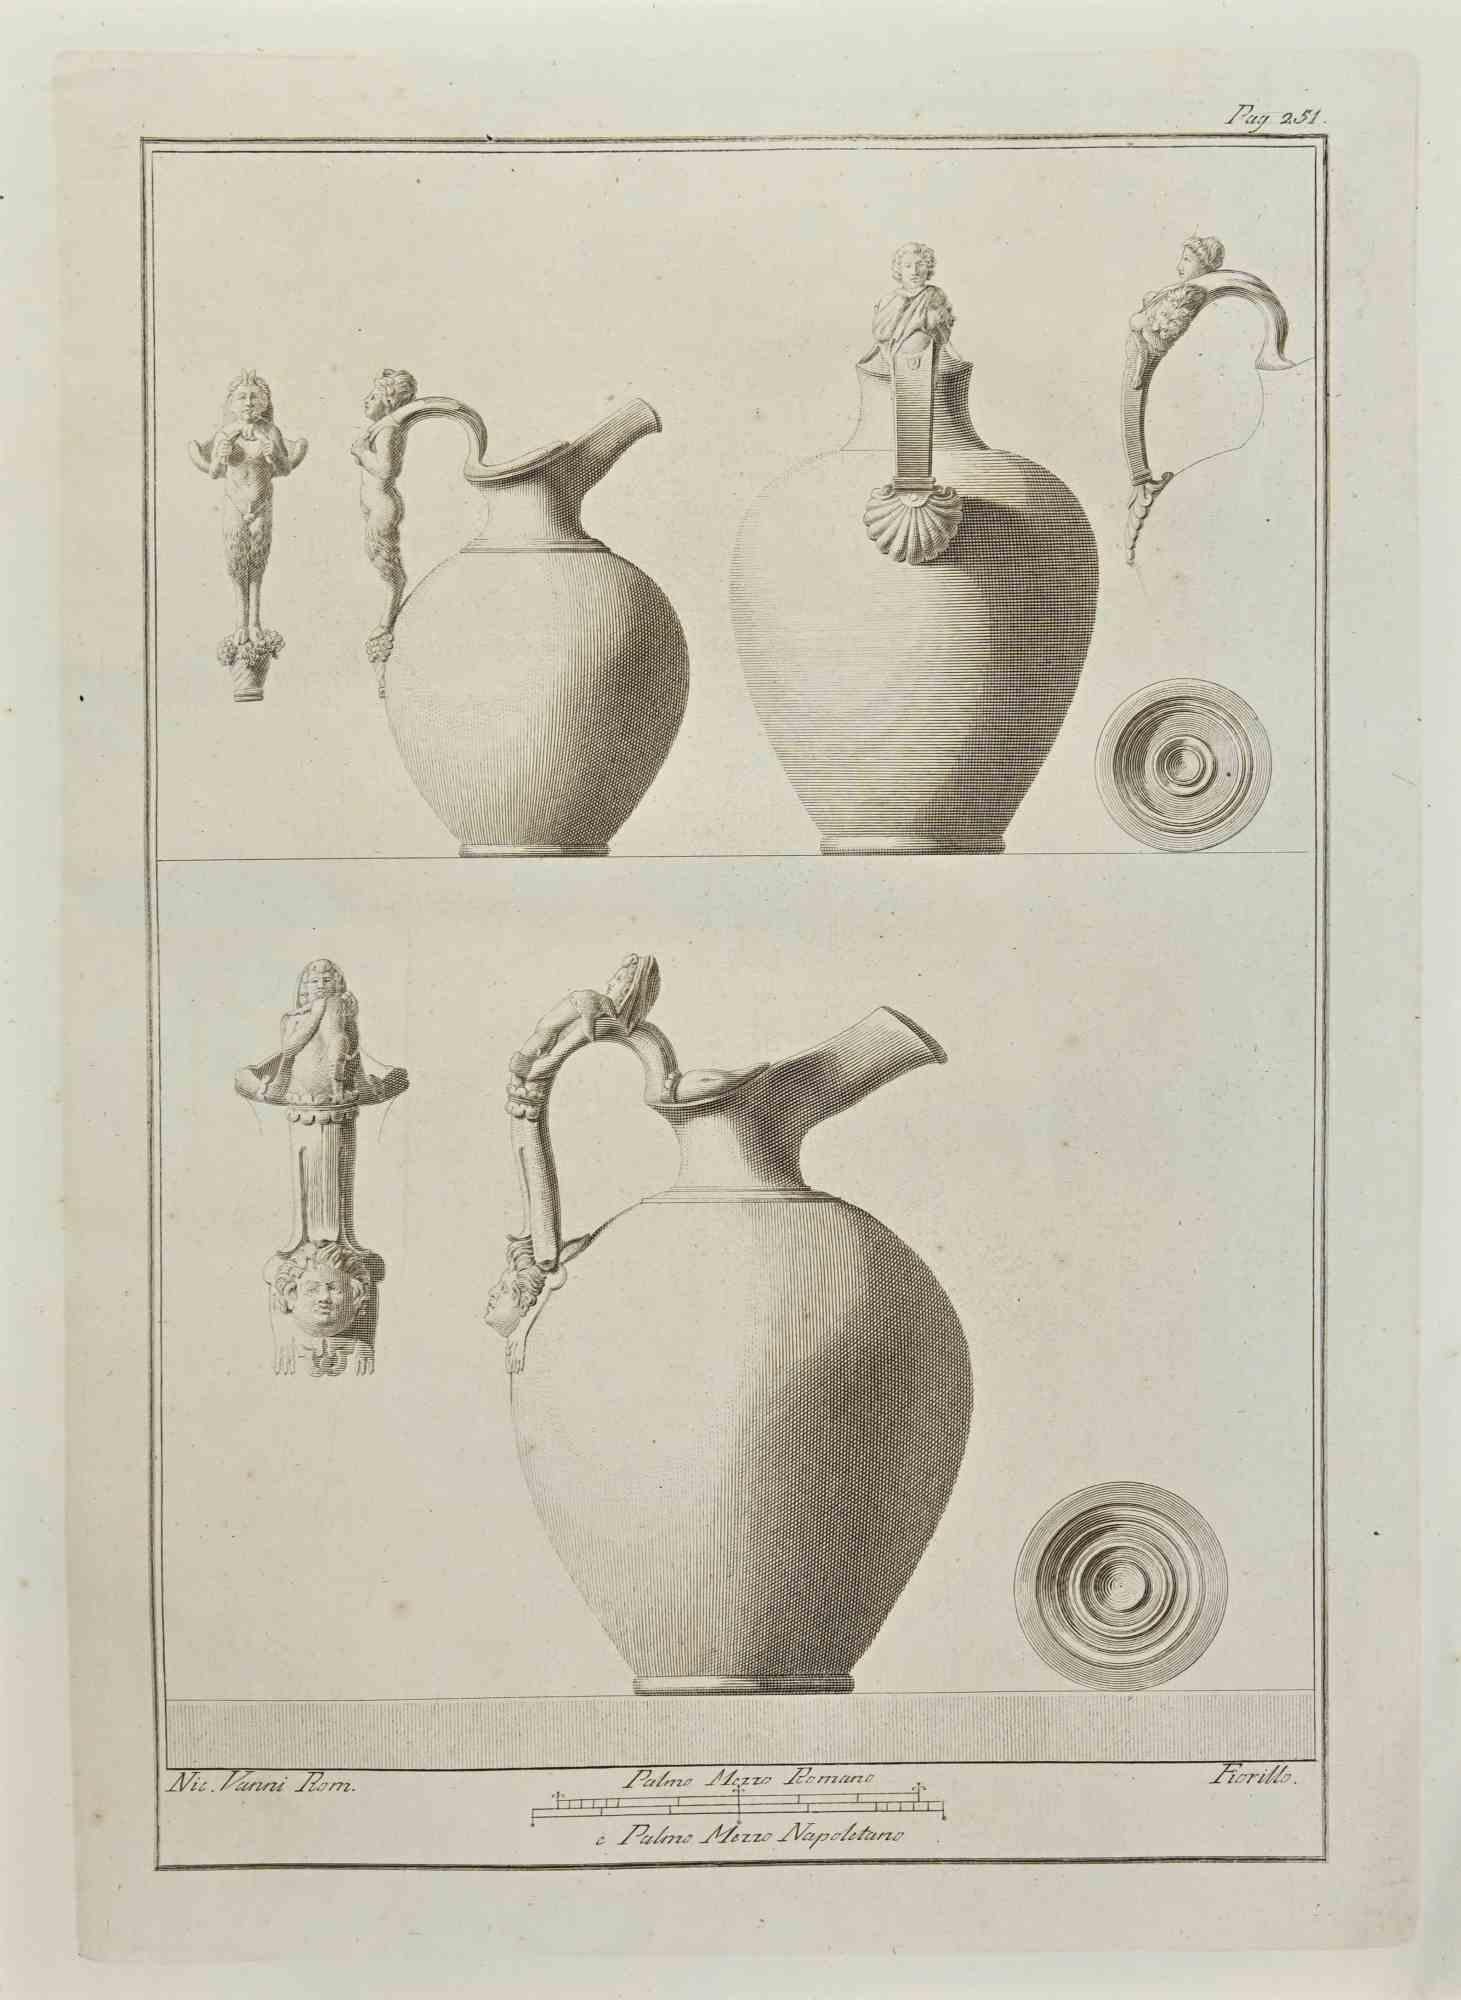 Ancient Roman Jars from "Antiquities of Herculaneum" is an etching on paper realized by Nicola Fiorillo in the 18th Century.

Signed on the plate.

Good conditions.

The etching belongs to the print suite “Antiquities of Herculaneum Exposed”